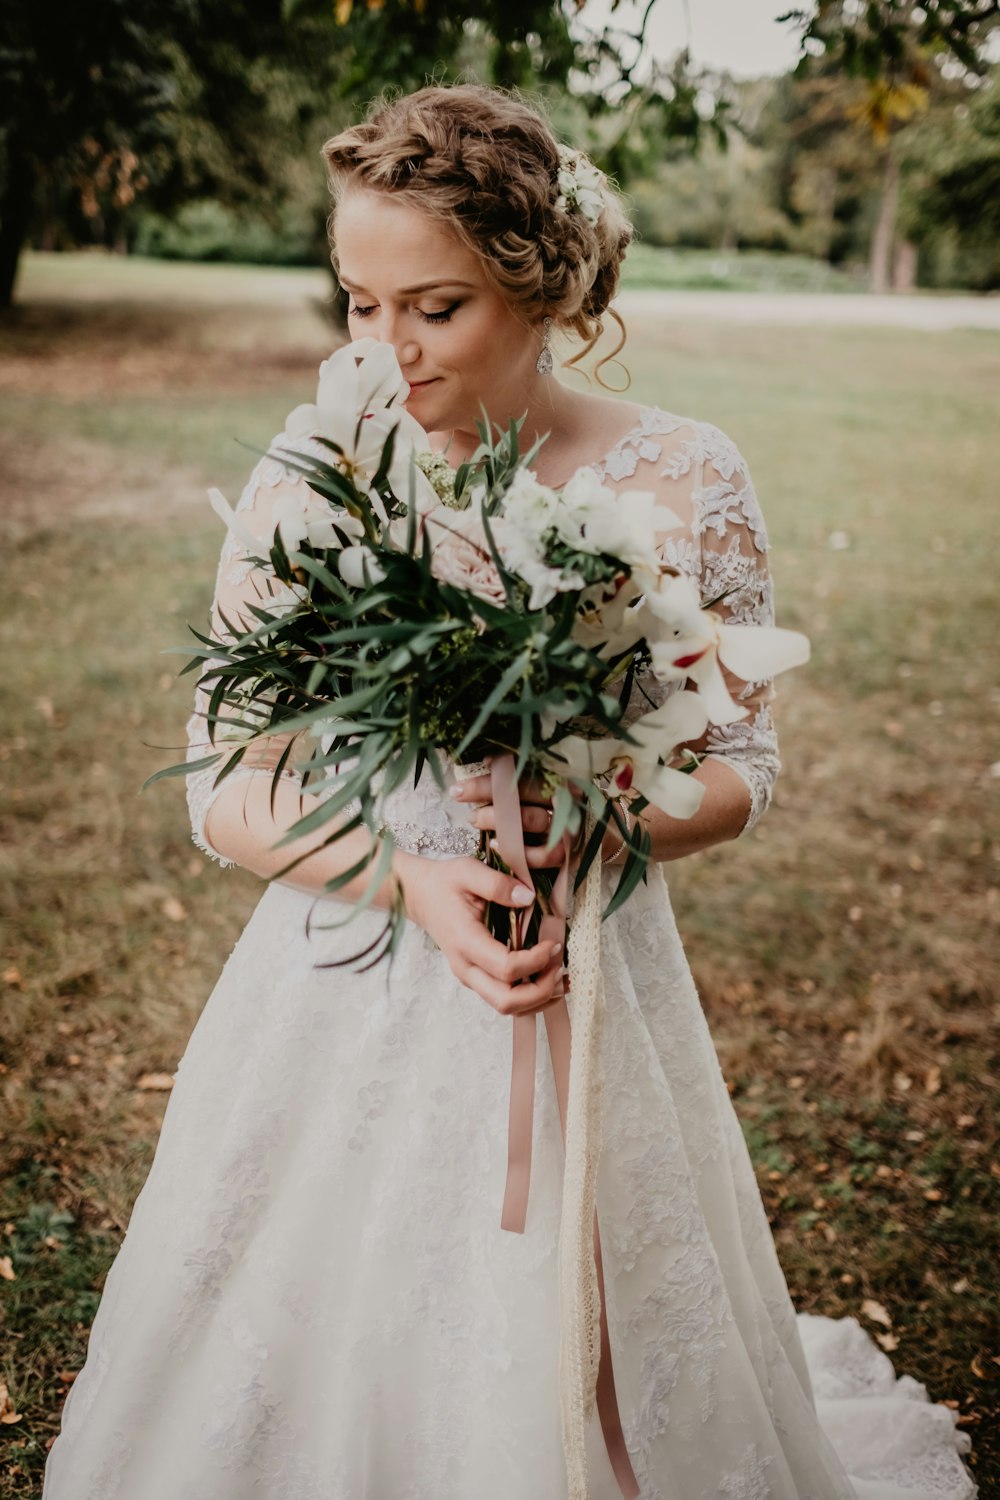 girl in white dress holding bouquet of flowers